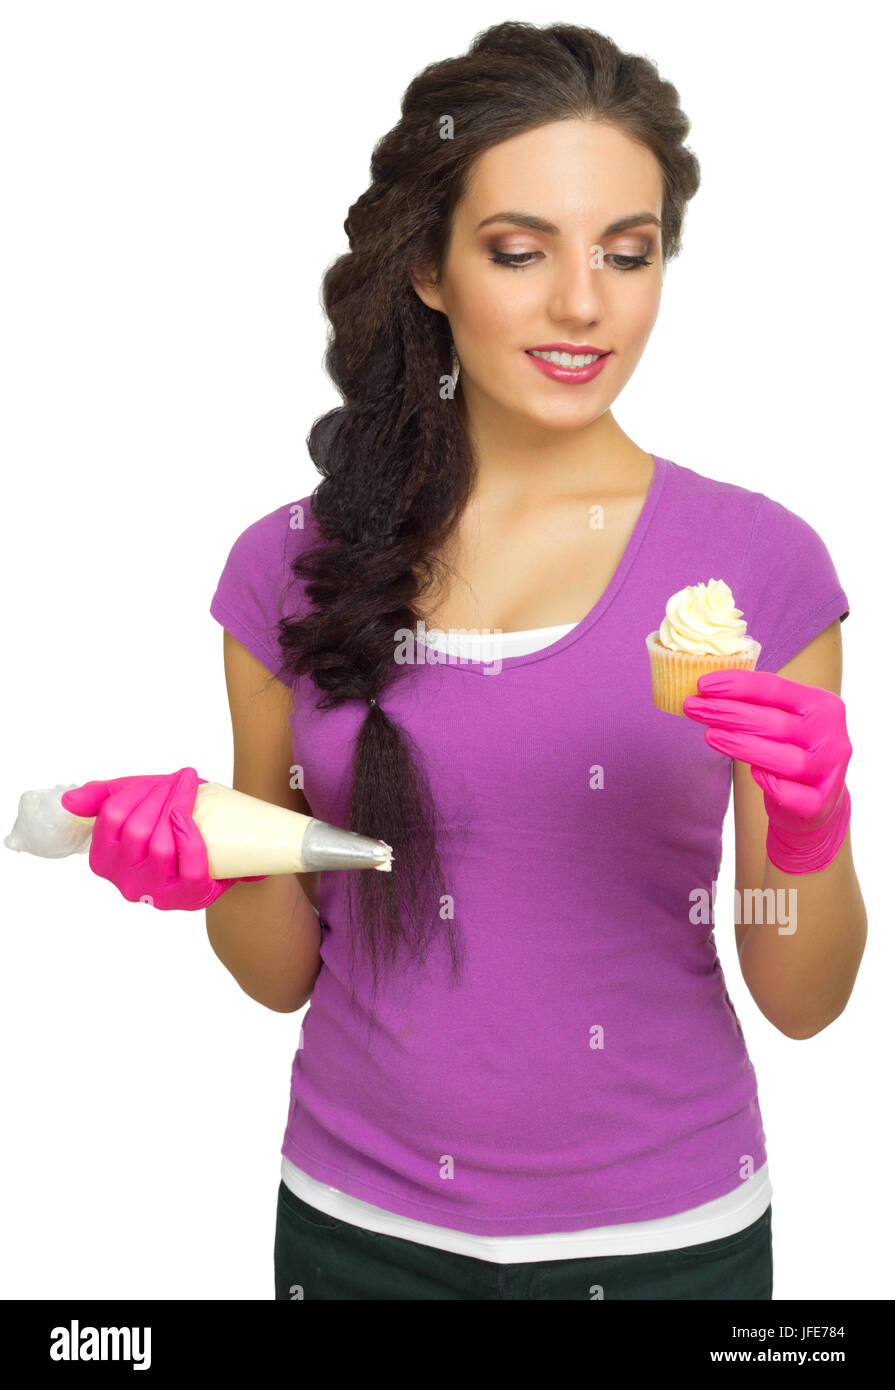 Young woman the chef prepares food isolated Stock Photo